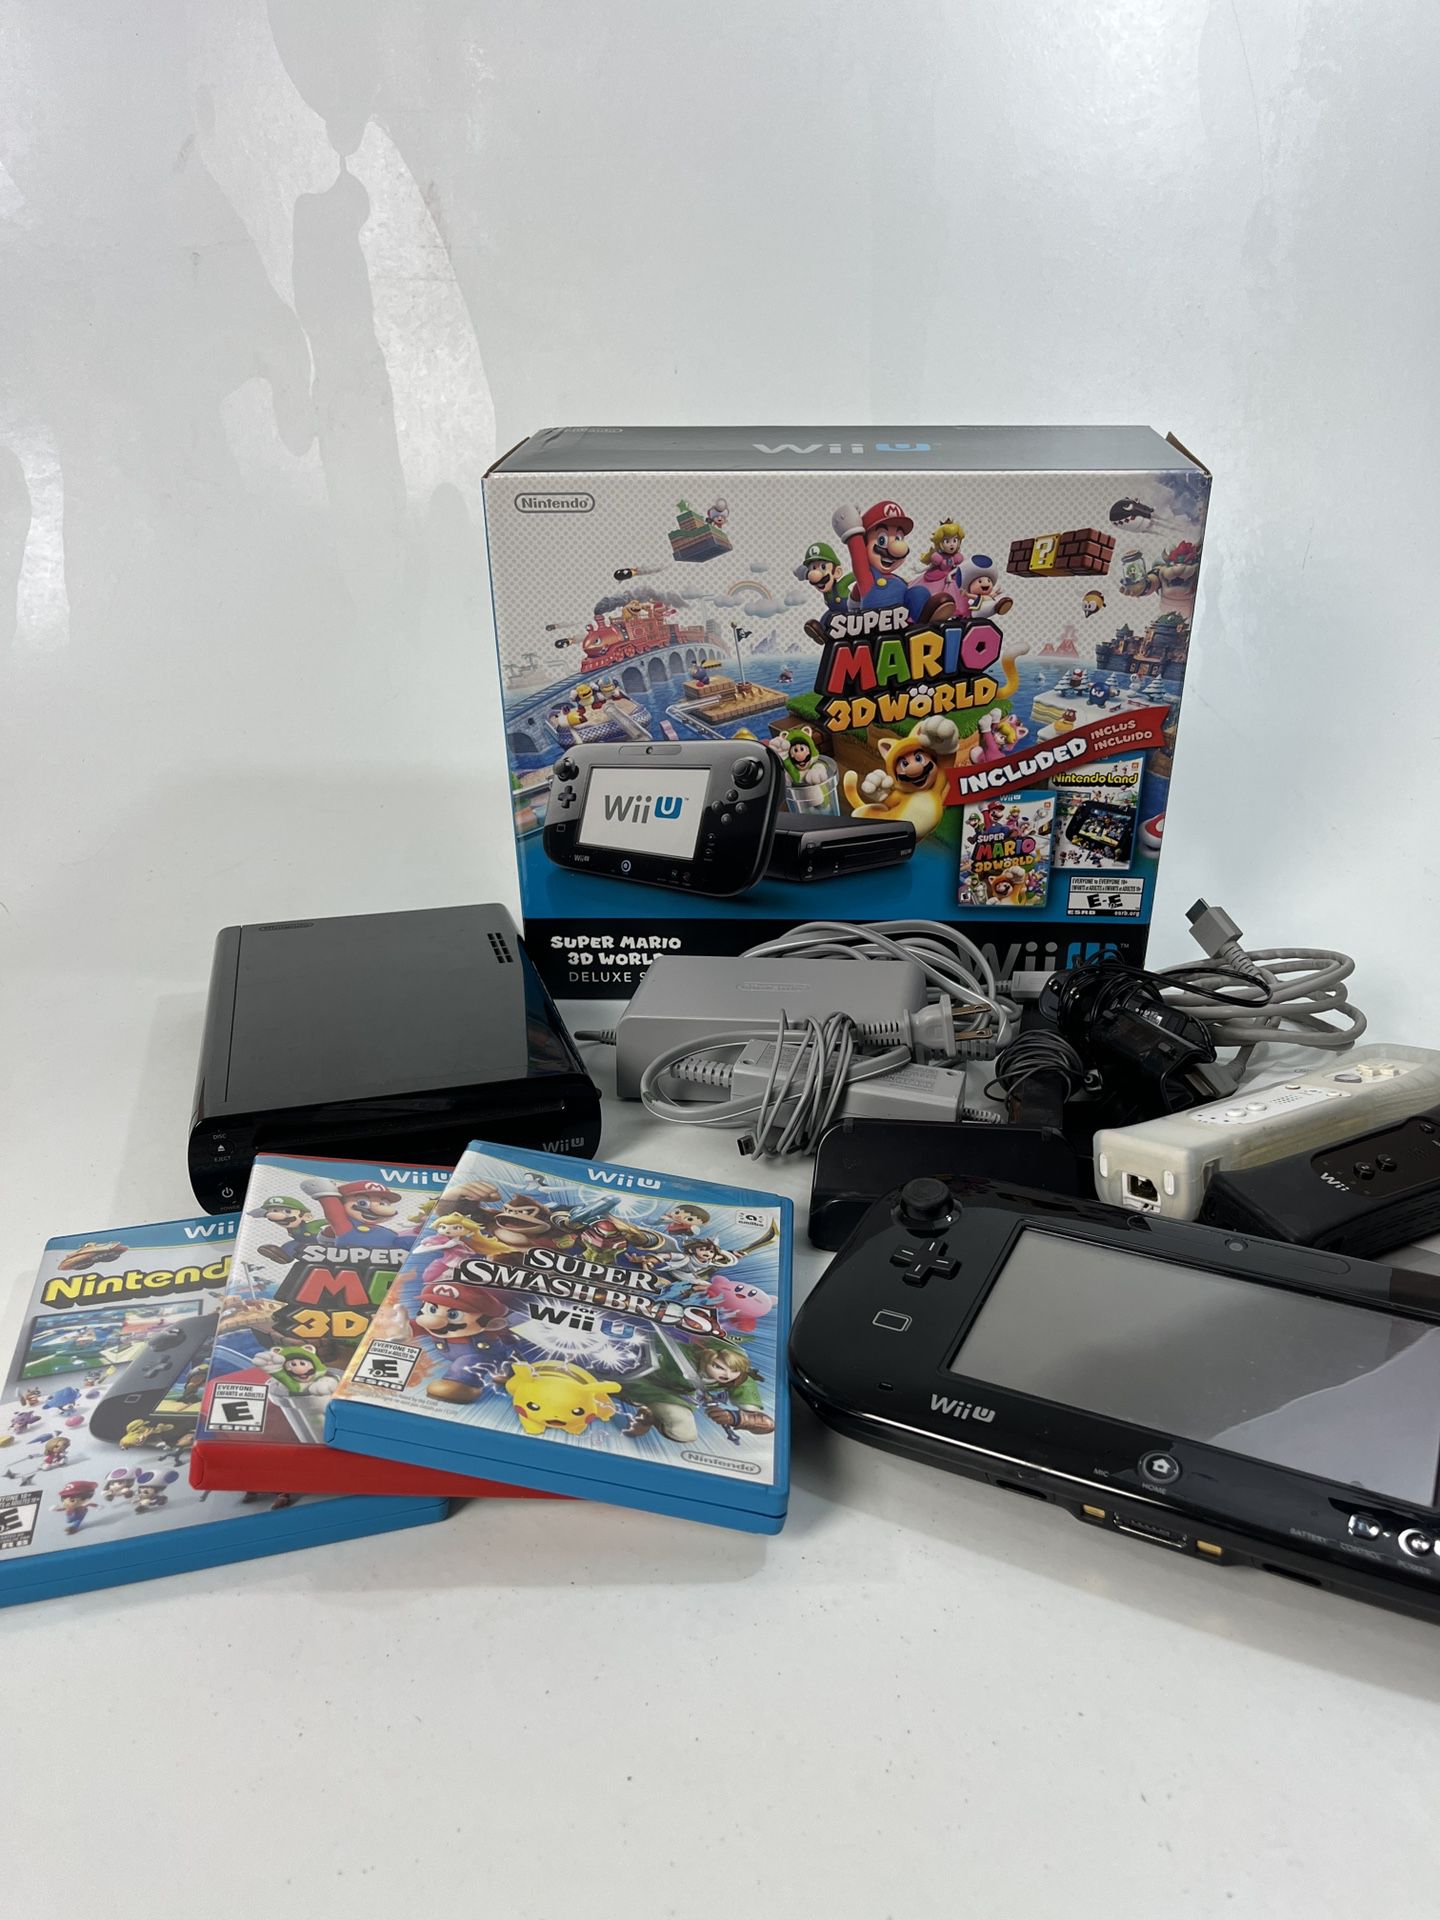 Nintendo Wii U 32 GB Super Mario 3D World Deluxe Set Black Bundle +Smash Bro   Working and Tested.  Very Good condition is Missing the #9 console brac